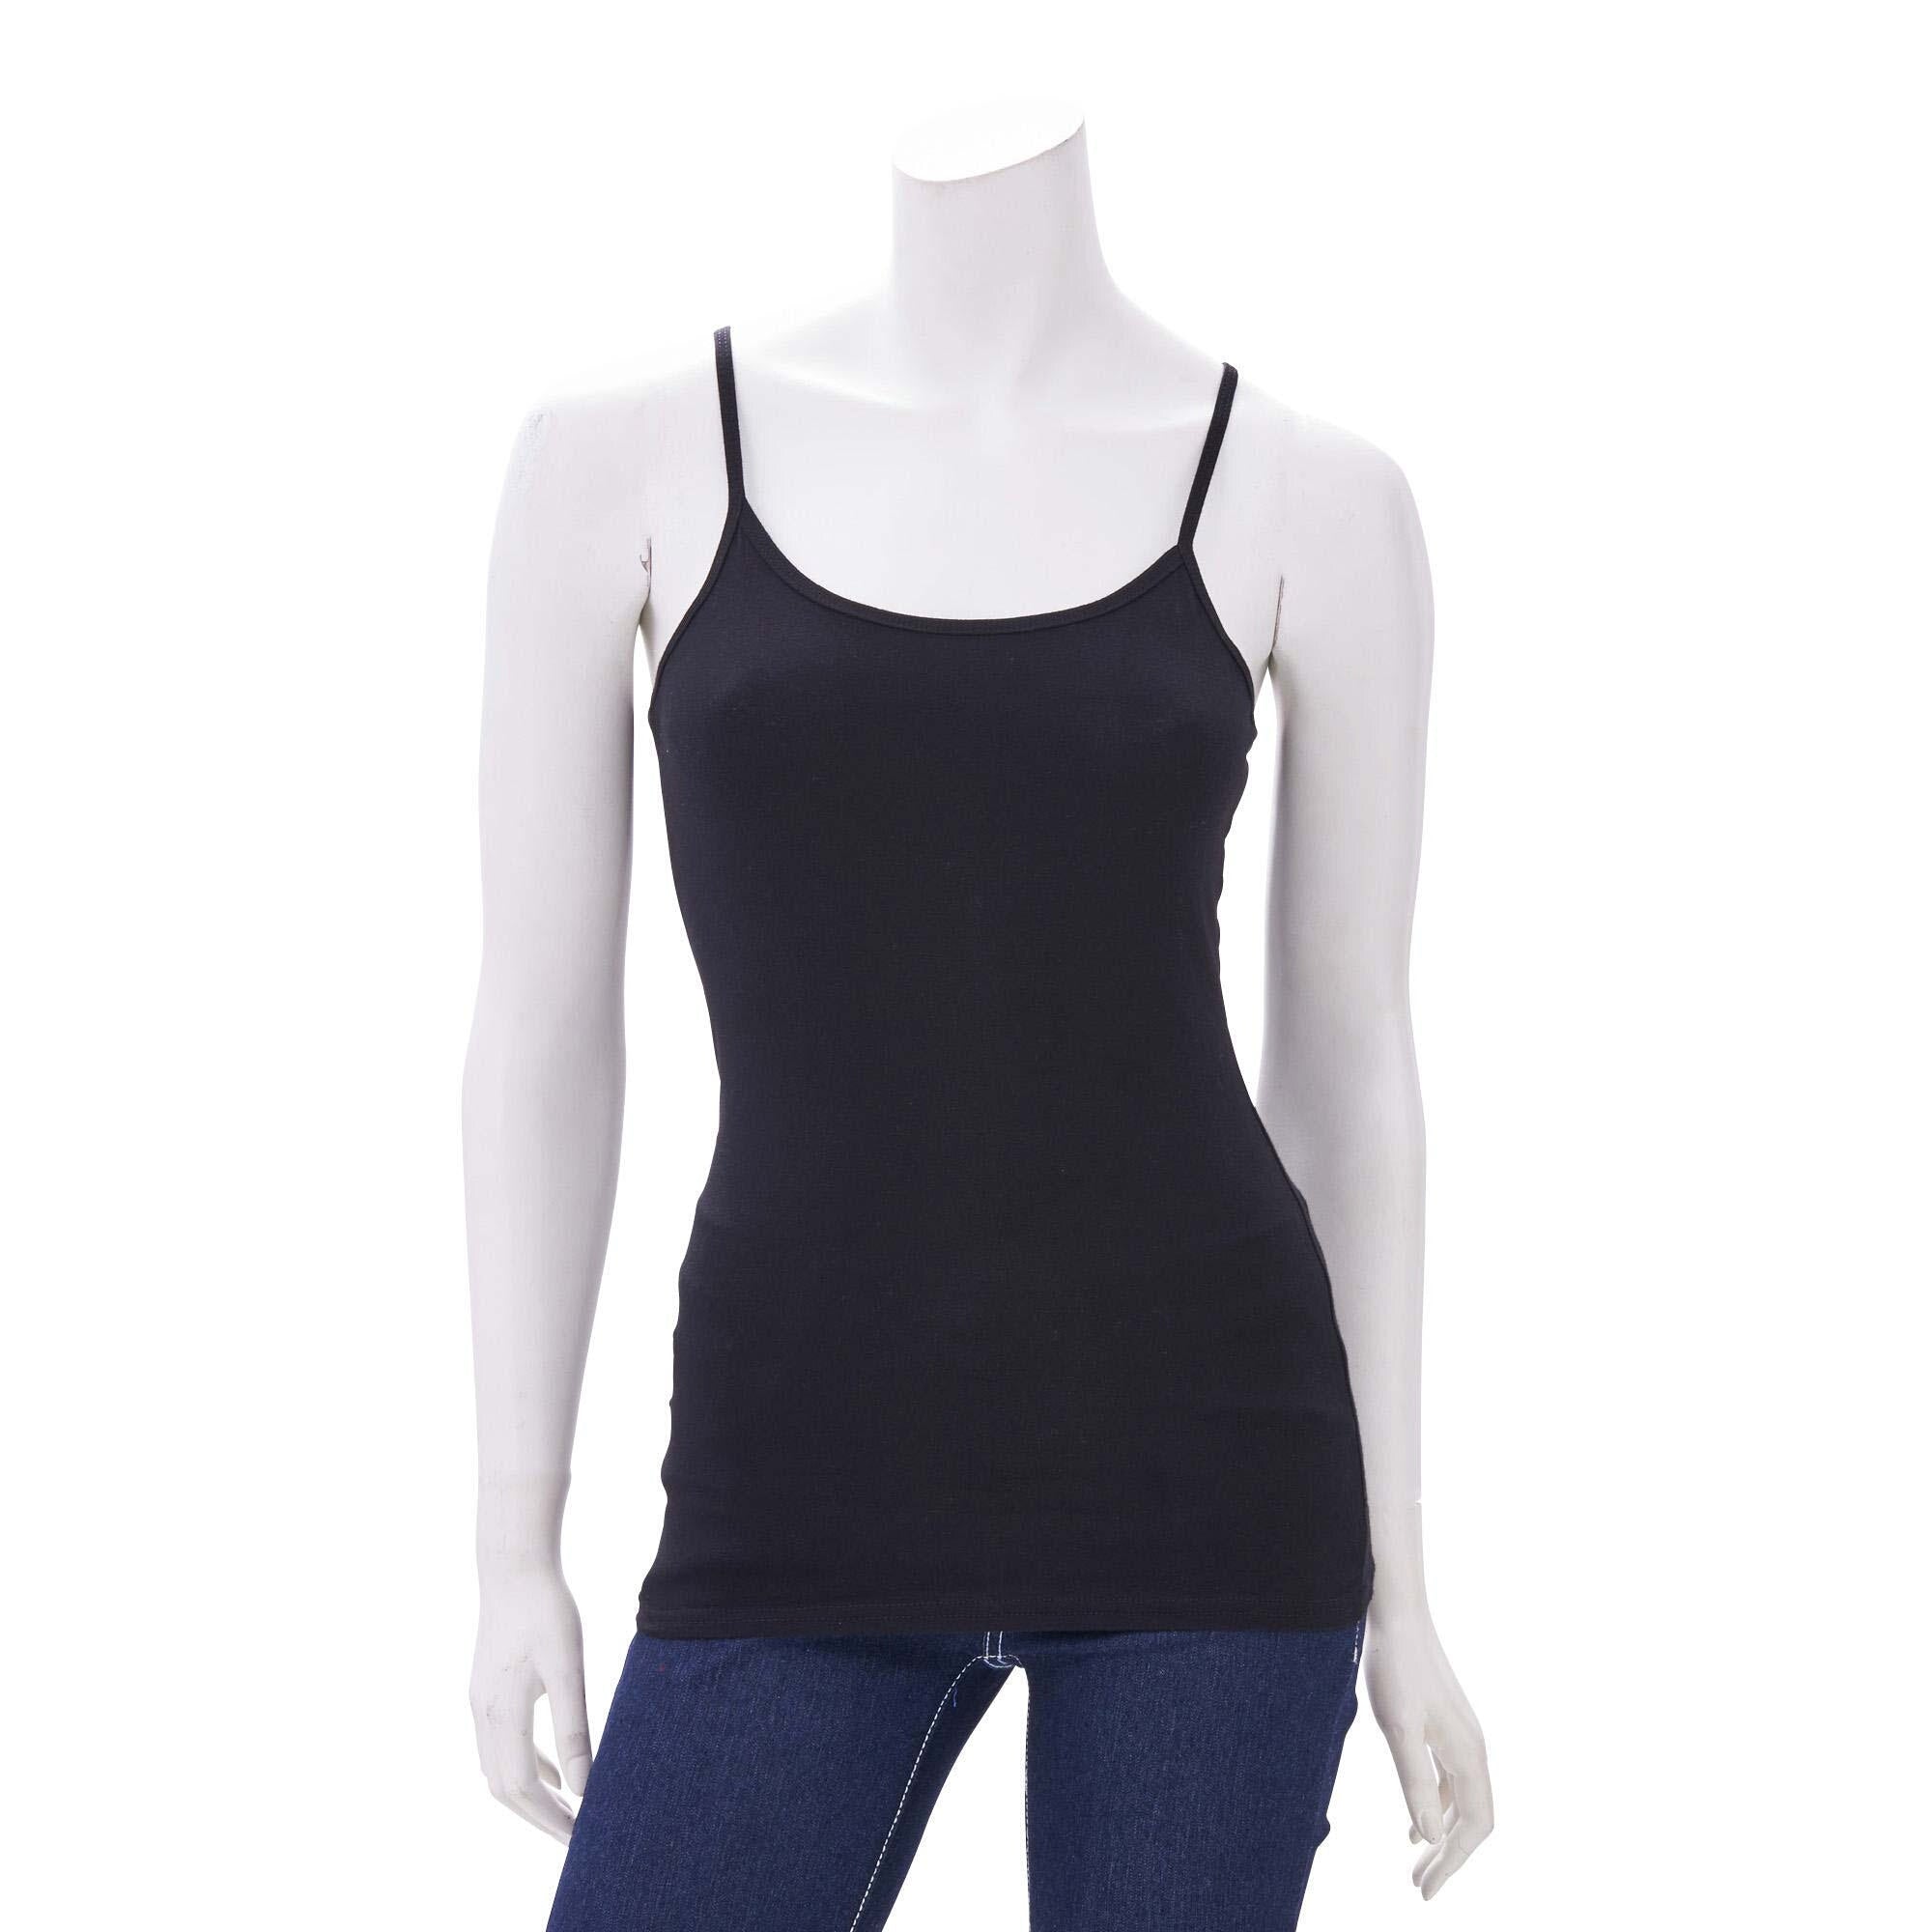 Finesse Miracle Cami Cotton Clip-on Mock Camisole Set Of 3-Black, Royal  Blue & Grey